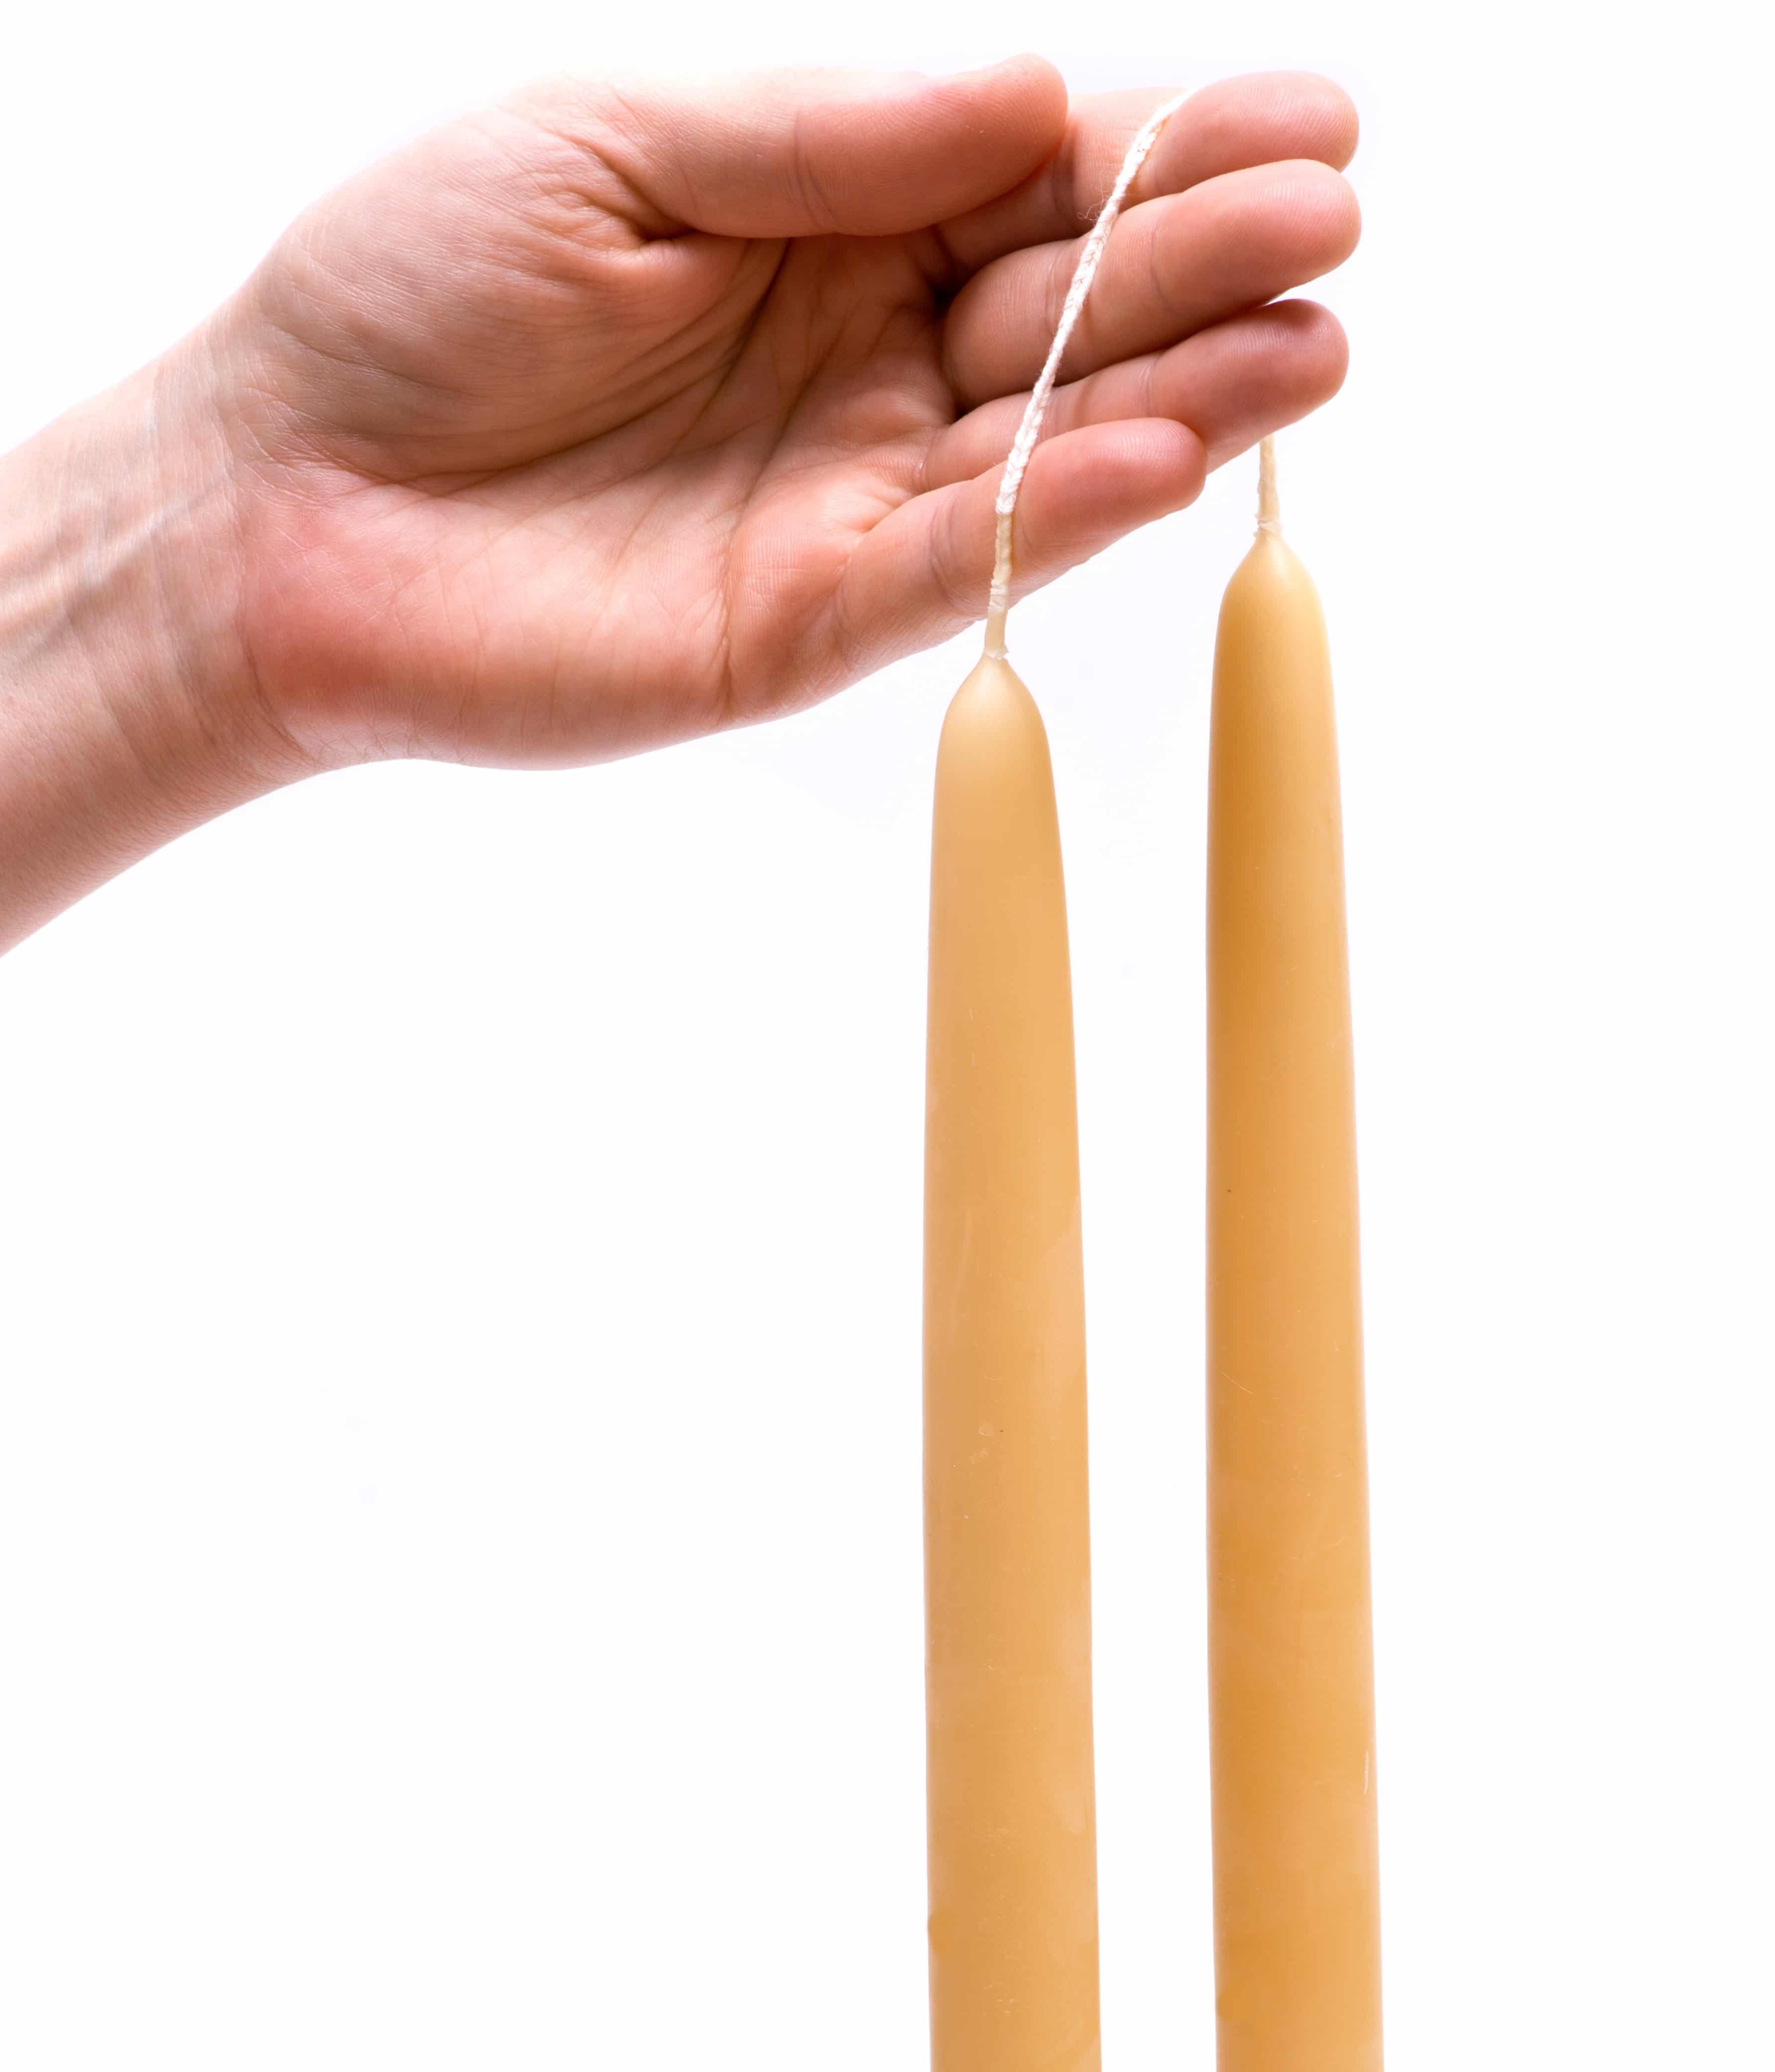 Candle Making Kit: Taper Candles With Beeswax